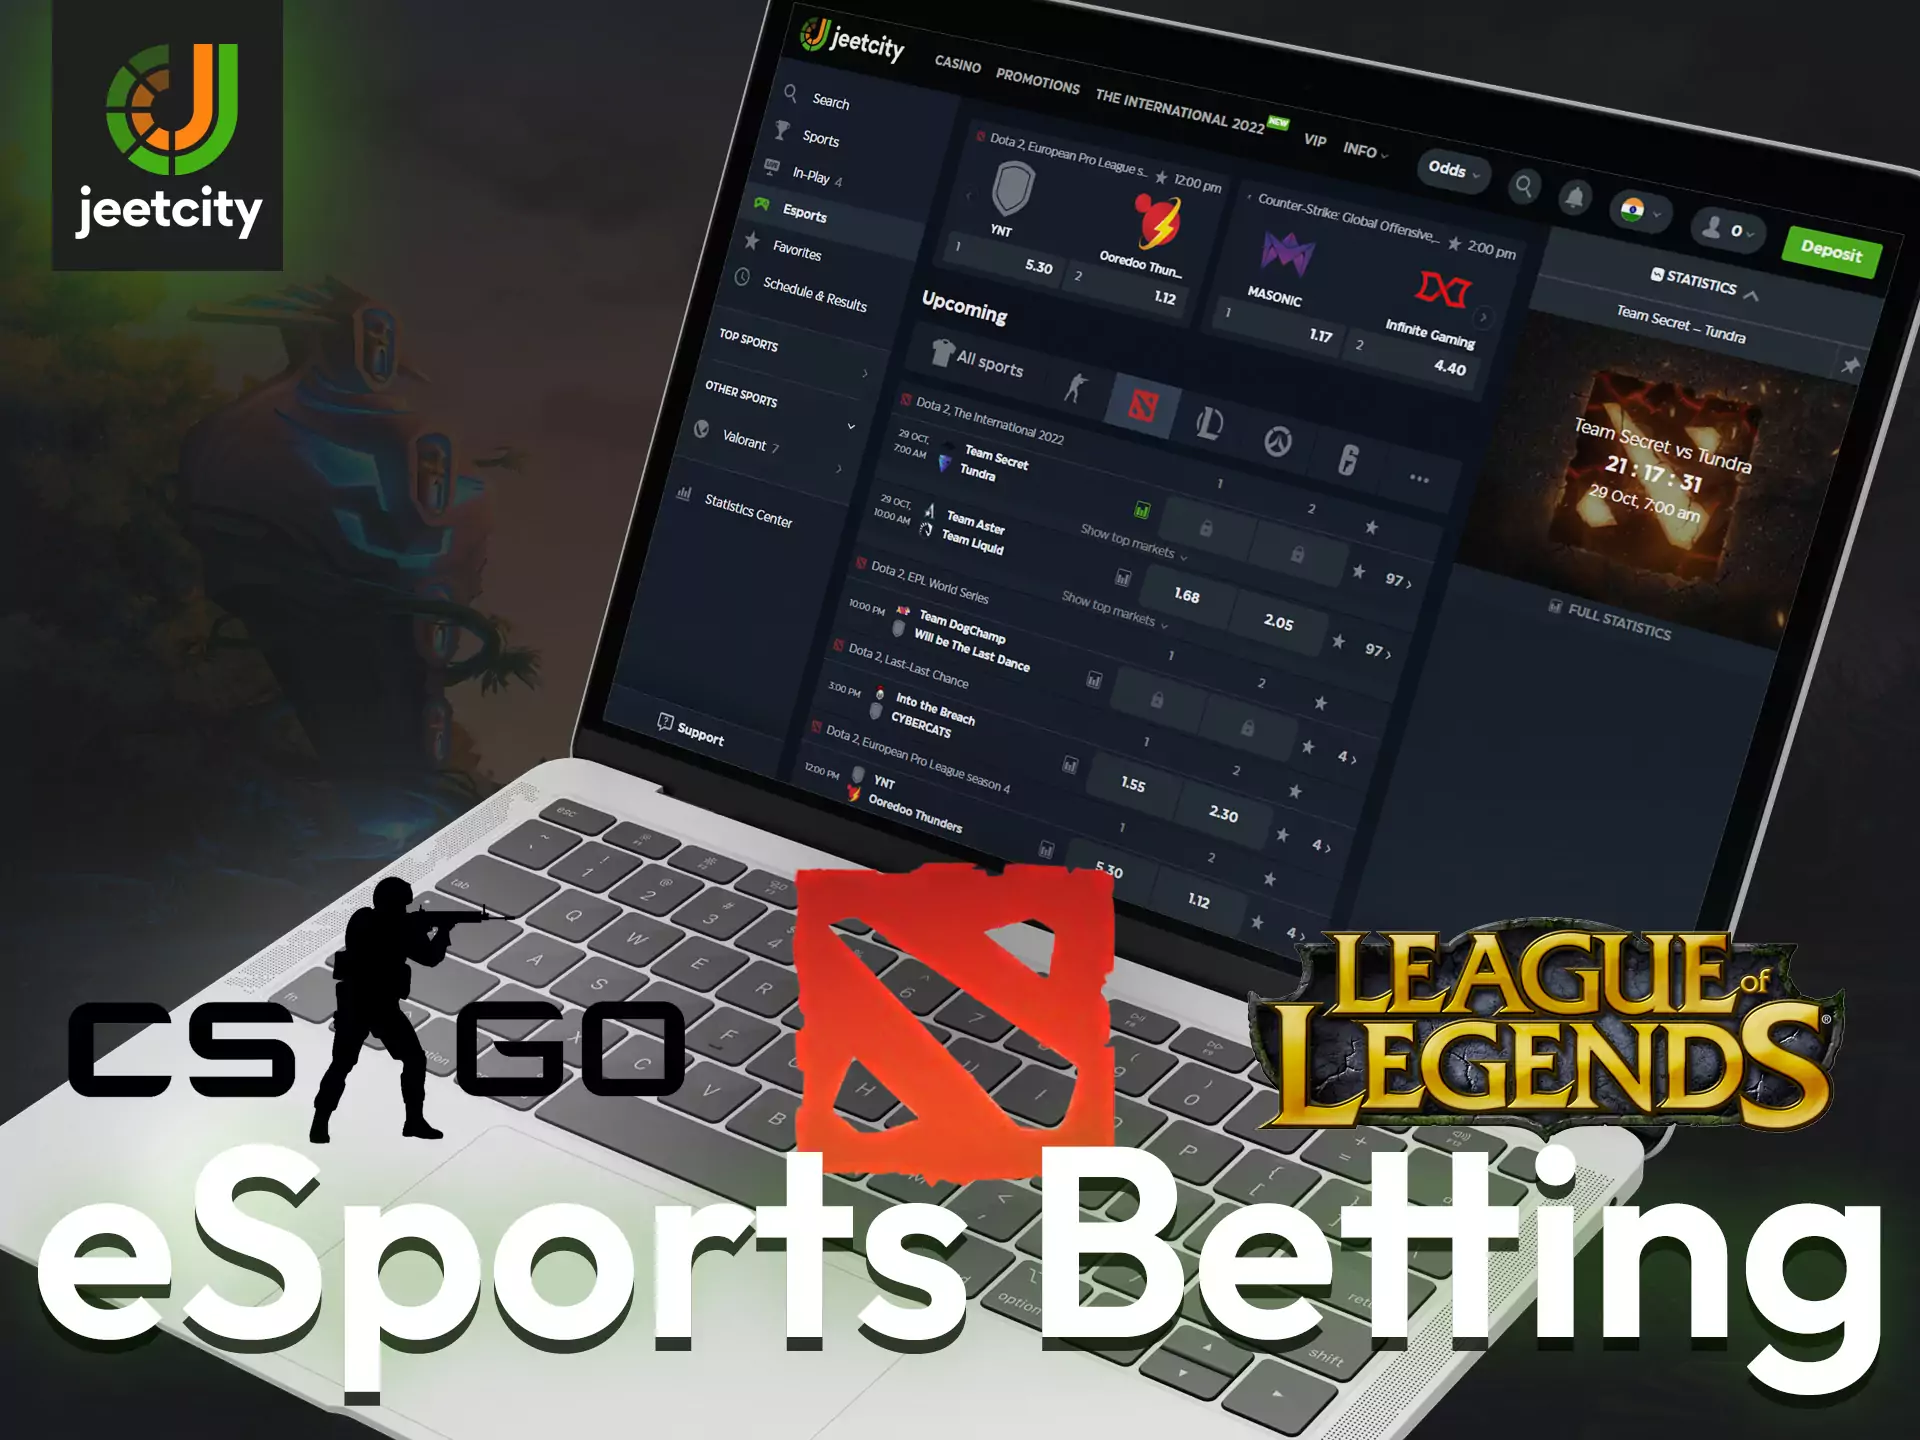 JeetCity offers betting on various esports events.